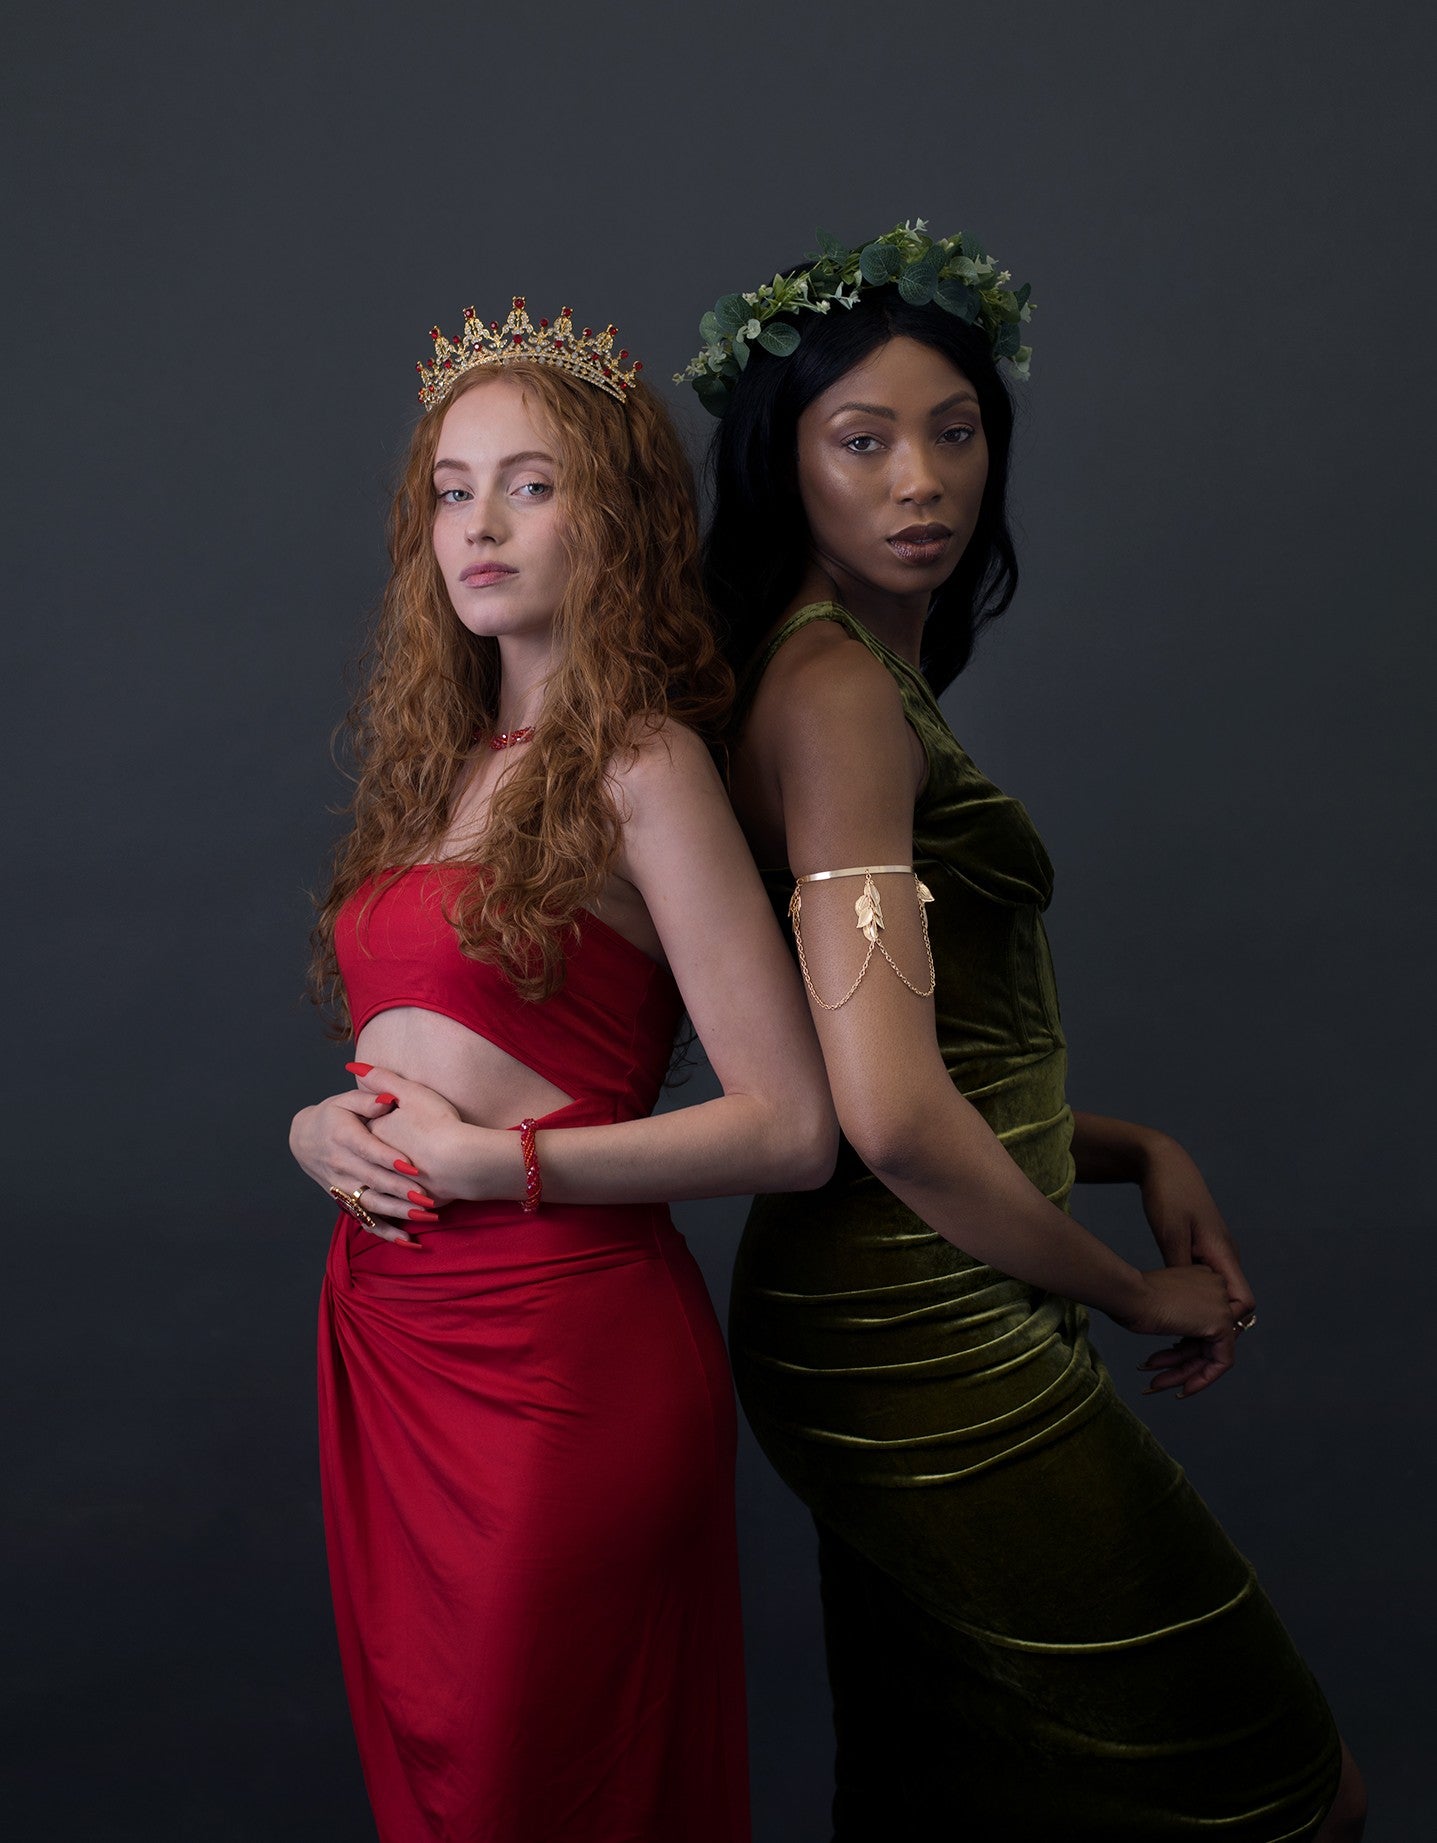 Naturally Wicked Fire Queen Dressed In Vibrant Red Back To Back With Naturally Wicked Earth Queen Dressed In Earthly Green